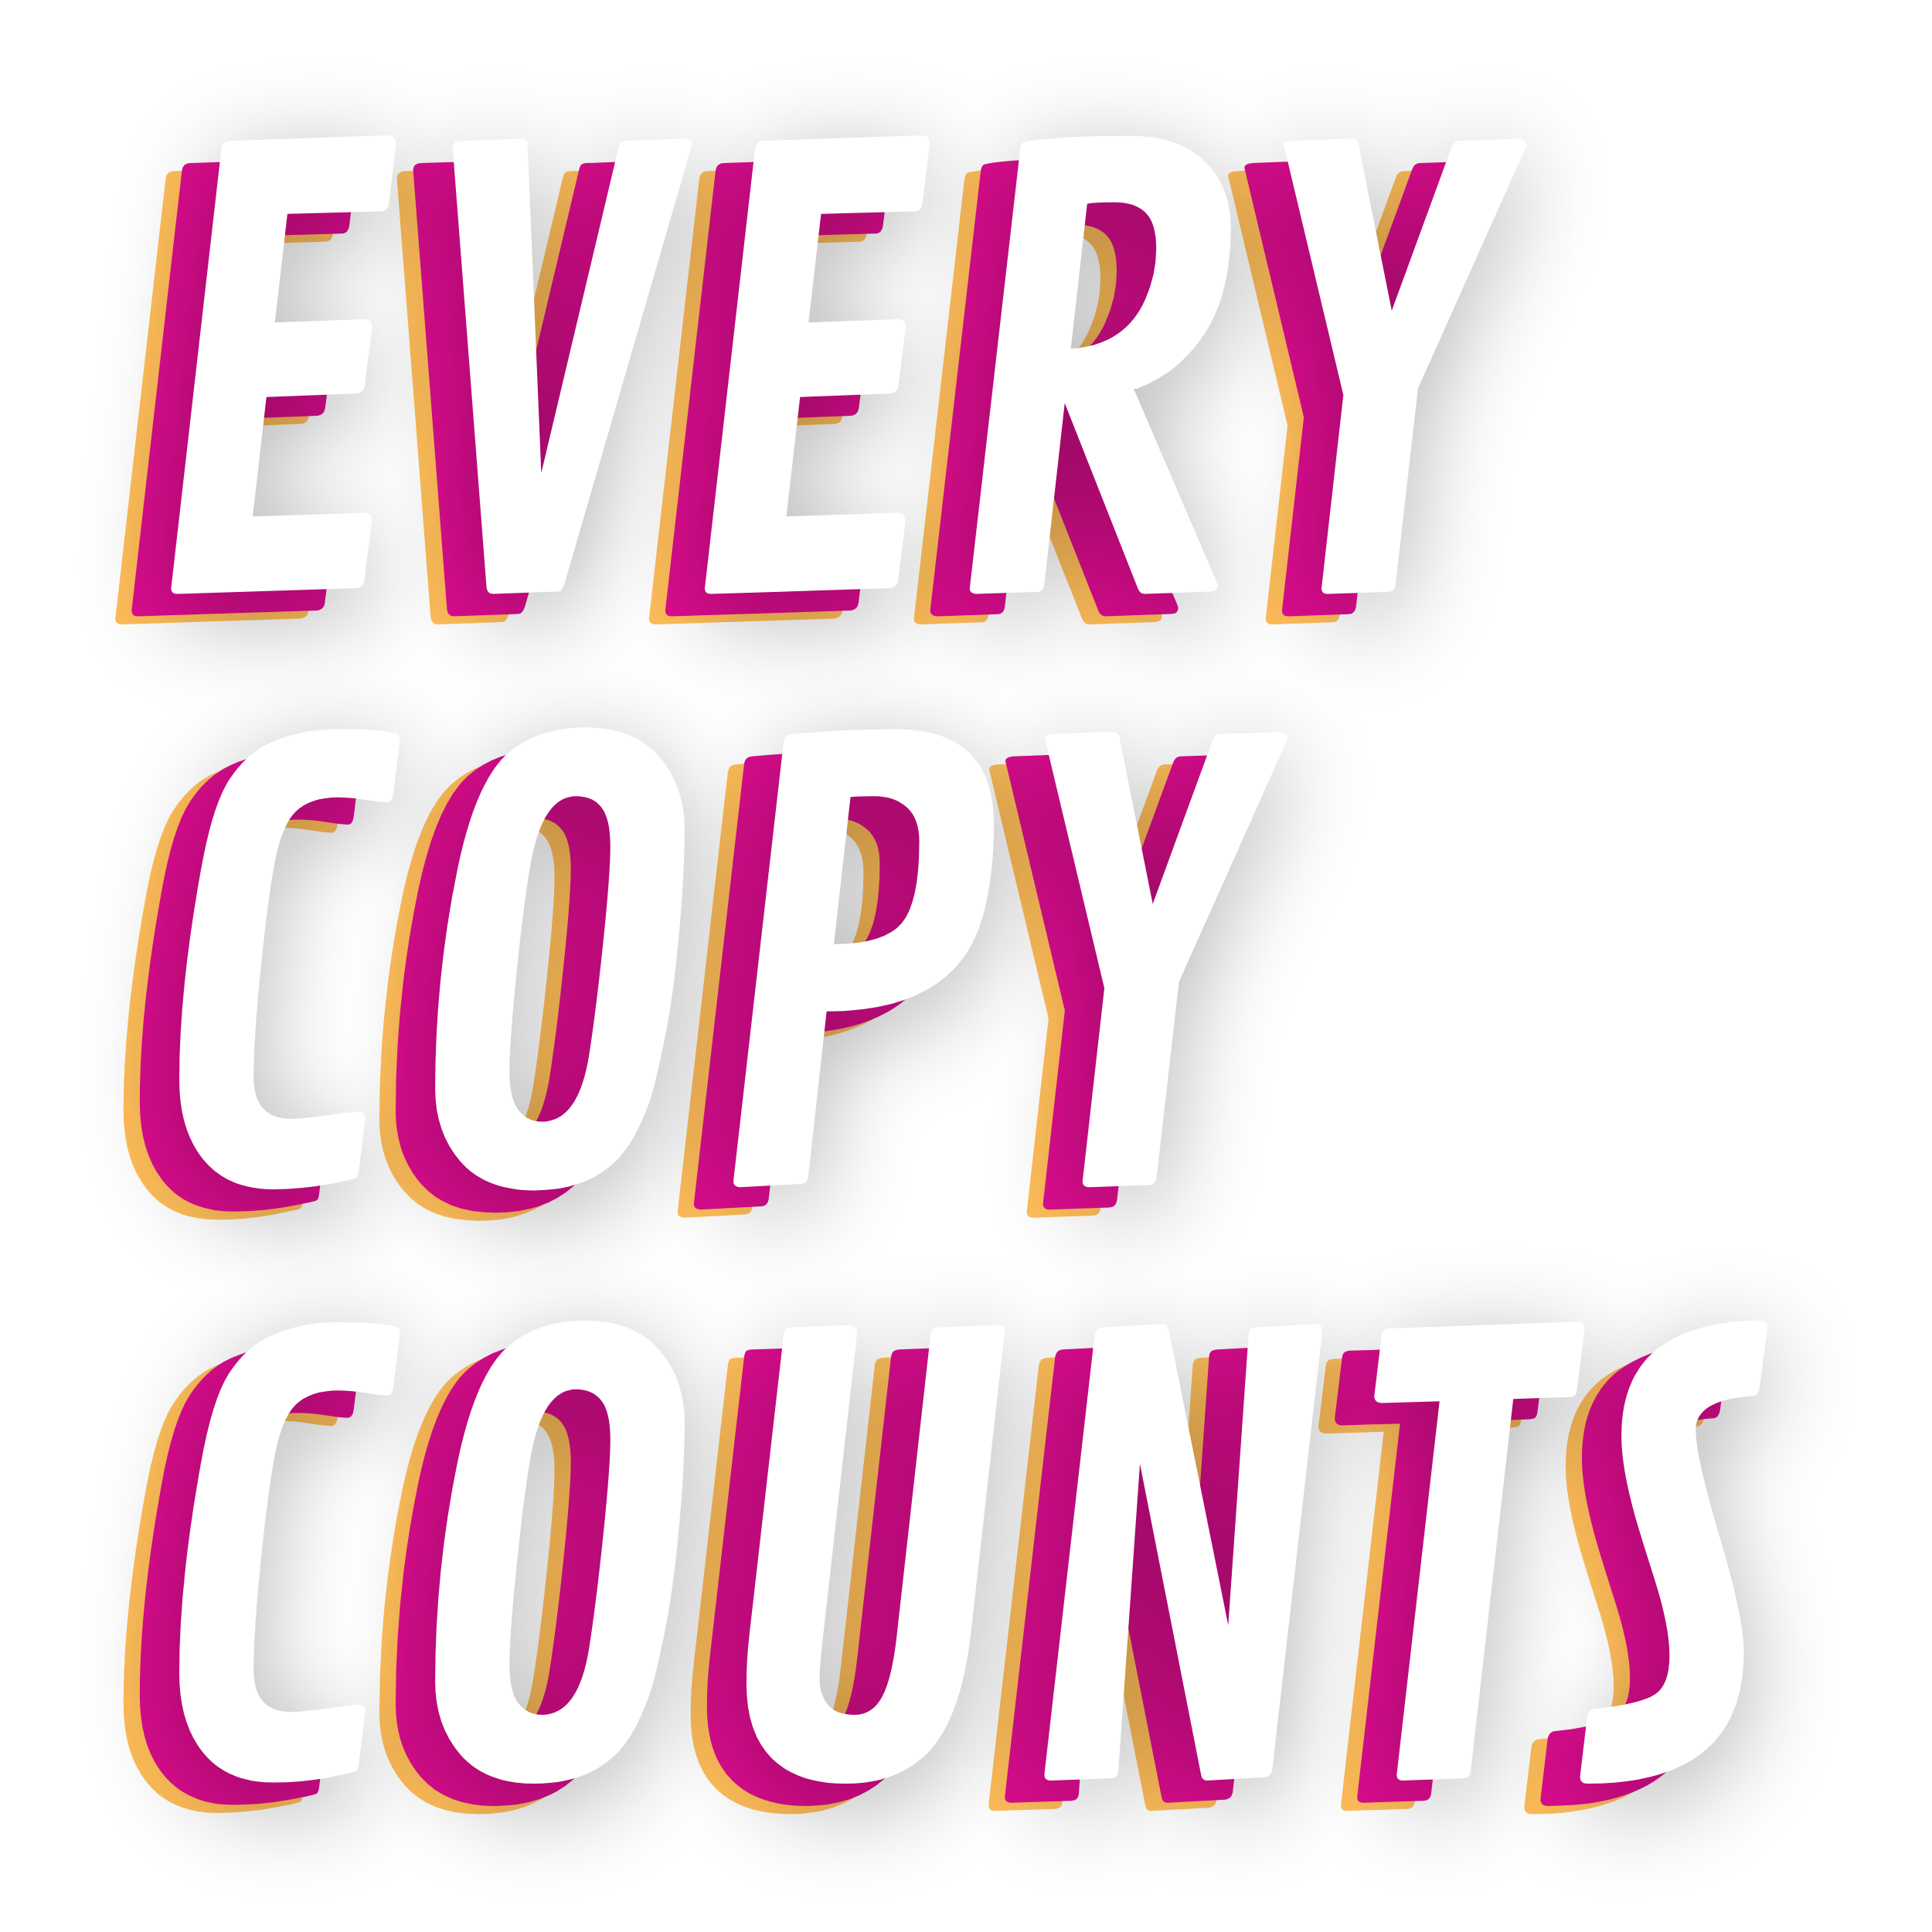 Every Copy Counts